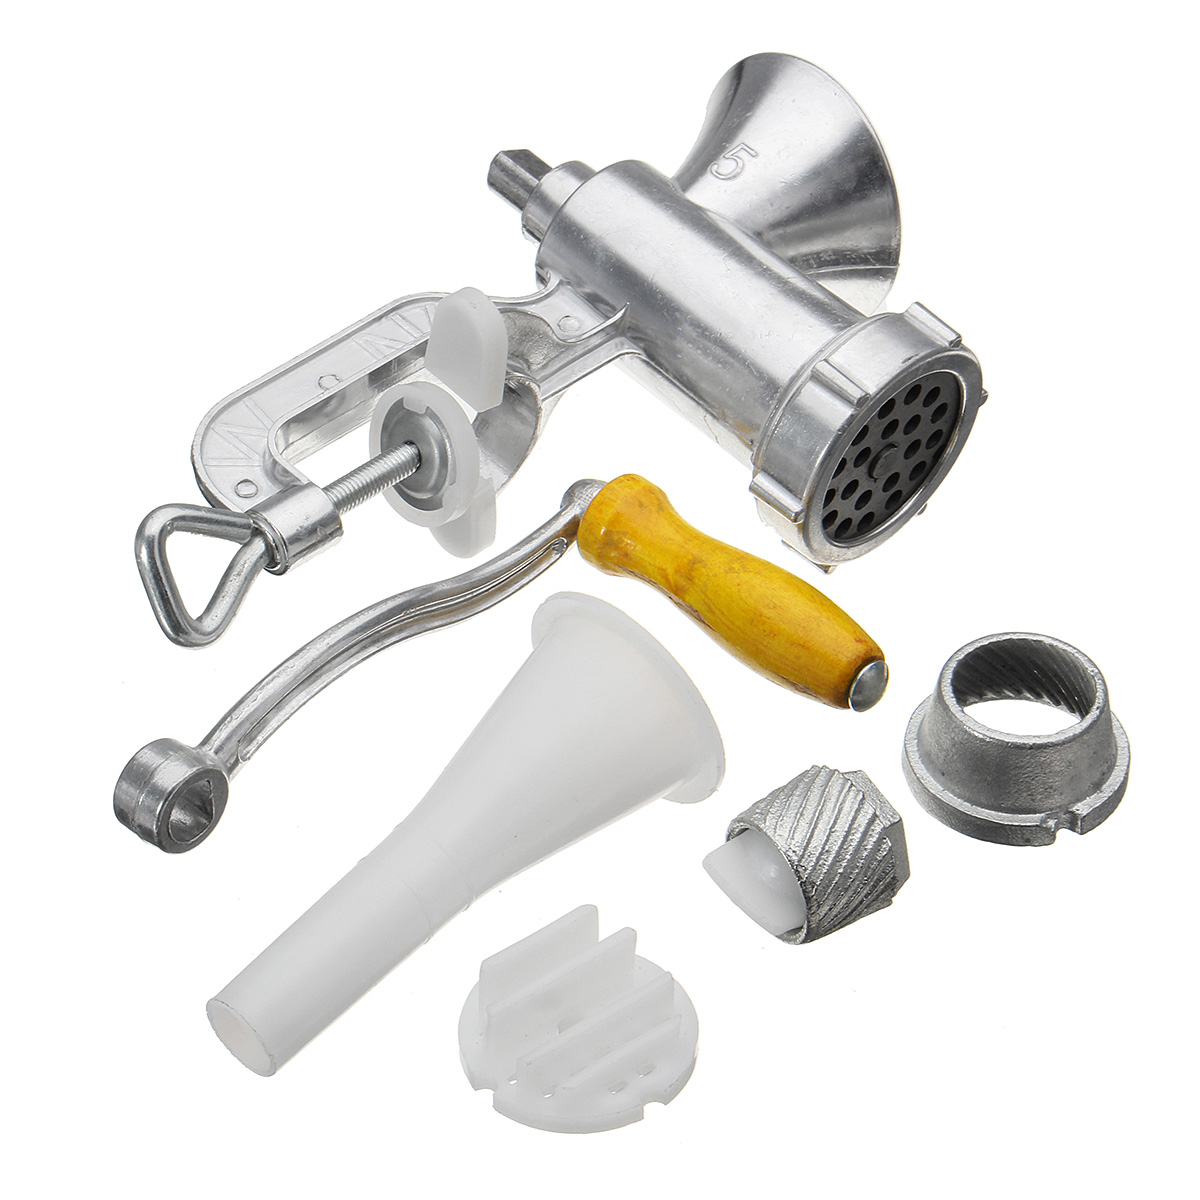 Aluminum-Alloy-Manual-Multifunction-Meat-Grinder-Mincer-EnemaTable-Kitchen-Home-Meat-Chopper-1327924